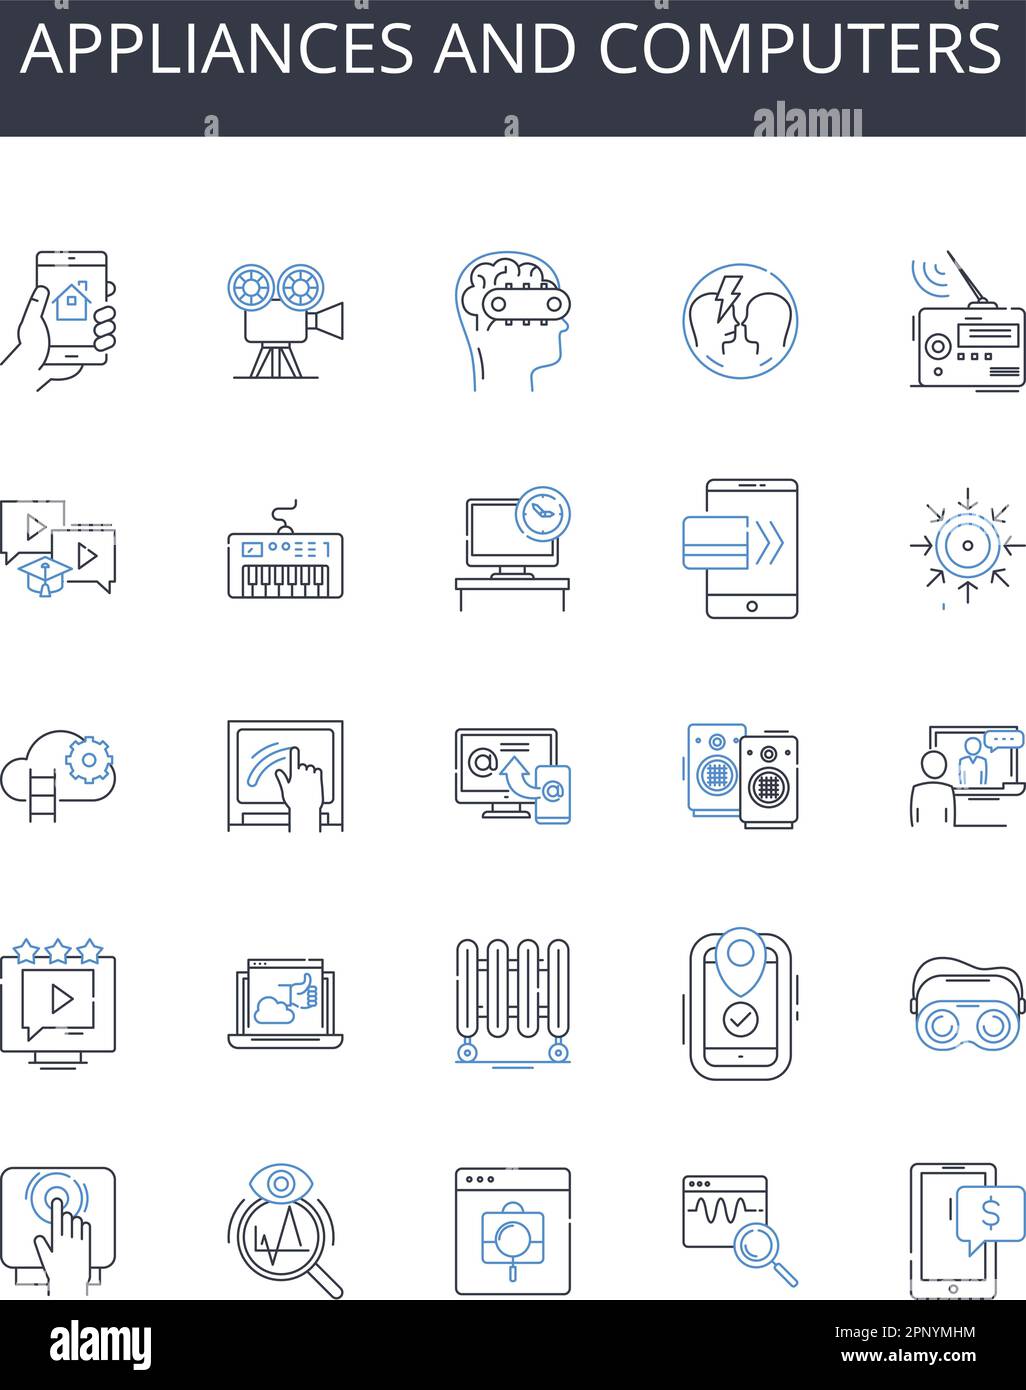 Appliances and computers line icons collection. Devices, Gadgets, Machines, Electrics, Tech, Equipment, Tools vector and linear illustration Stock Vector